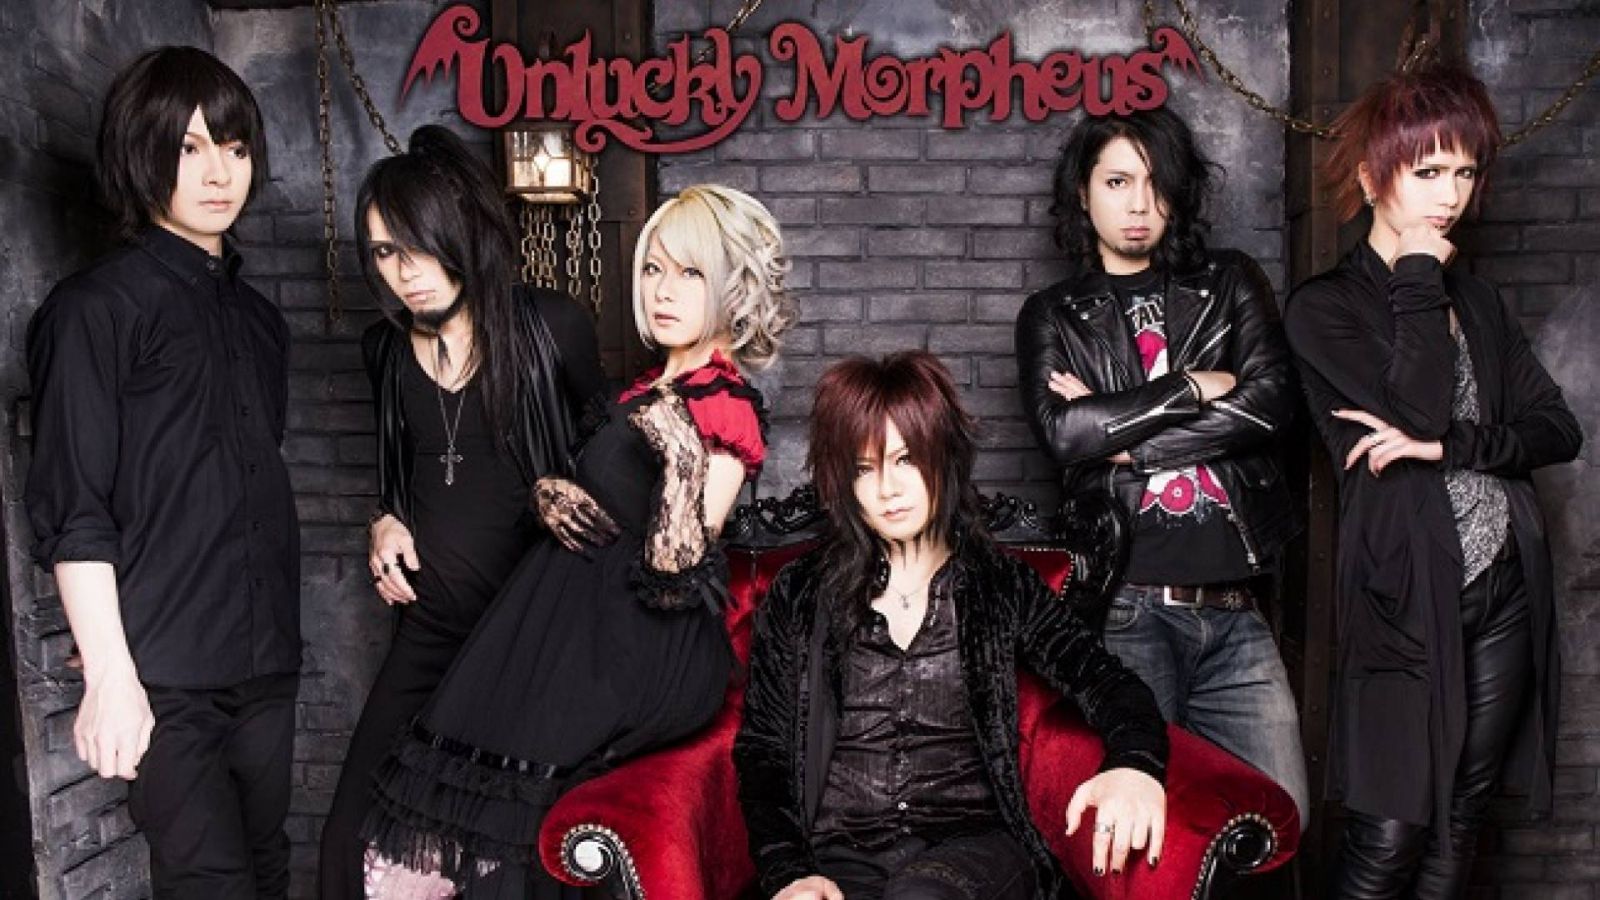 New Live Releases from Unlucky Morpheus © 2015 Unlucky Morpheus